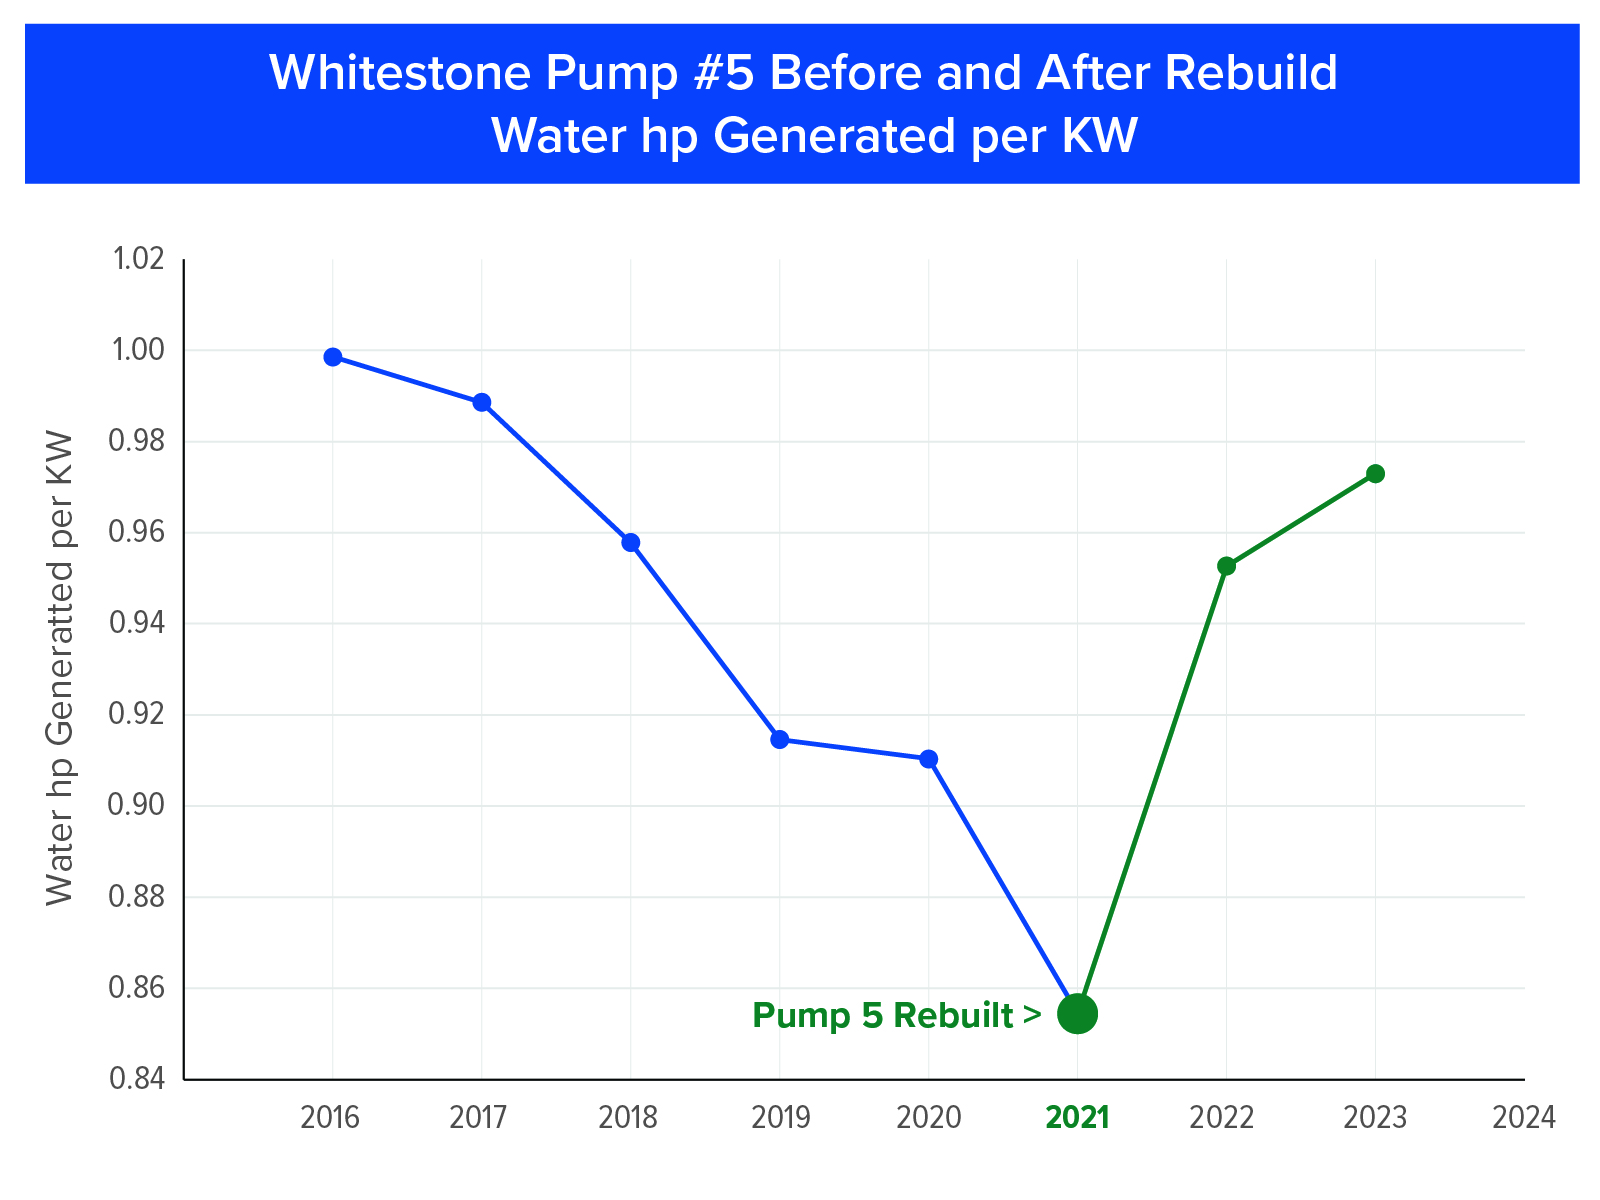 Pump 5 before and after rebuild